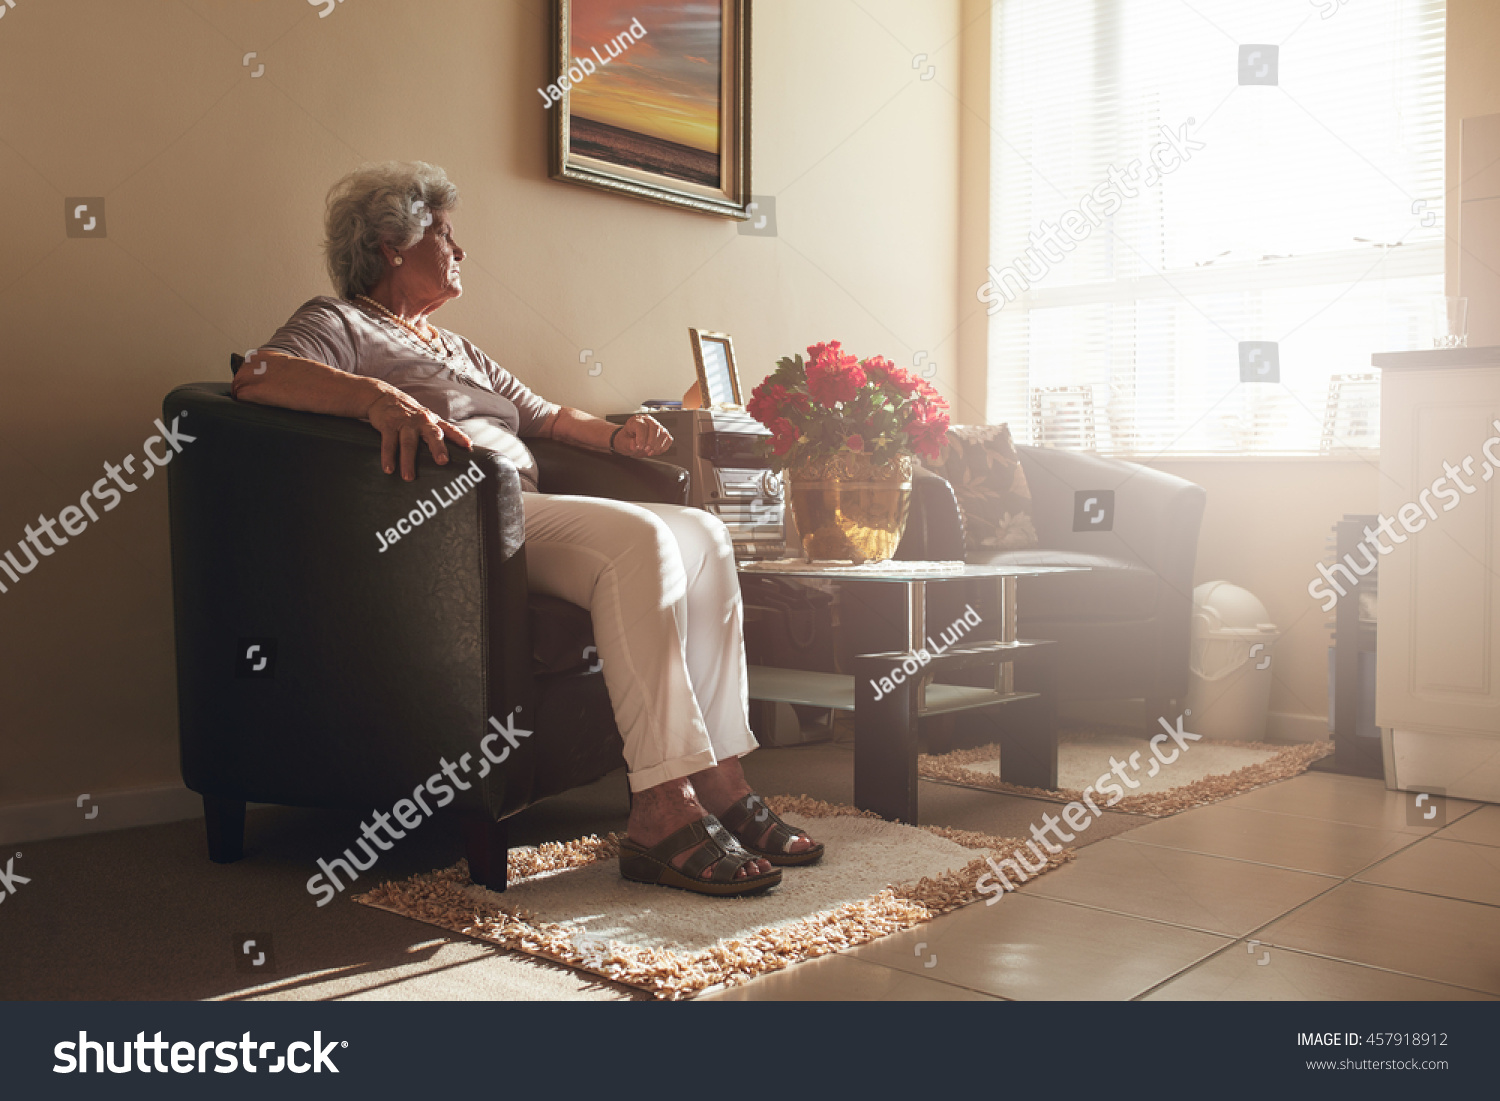 Senior woman sitting alone on a chair at home. Retired woman relaxing in living room. #457918912